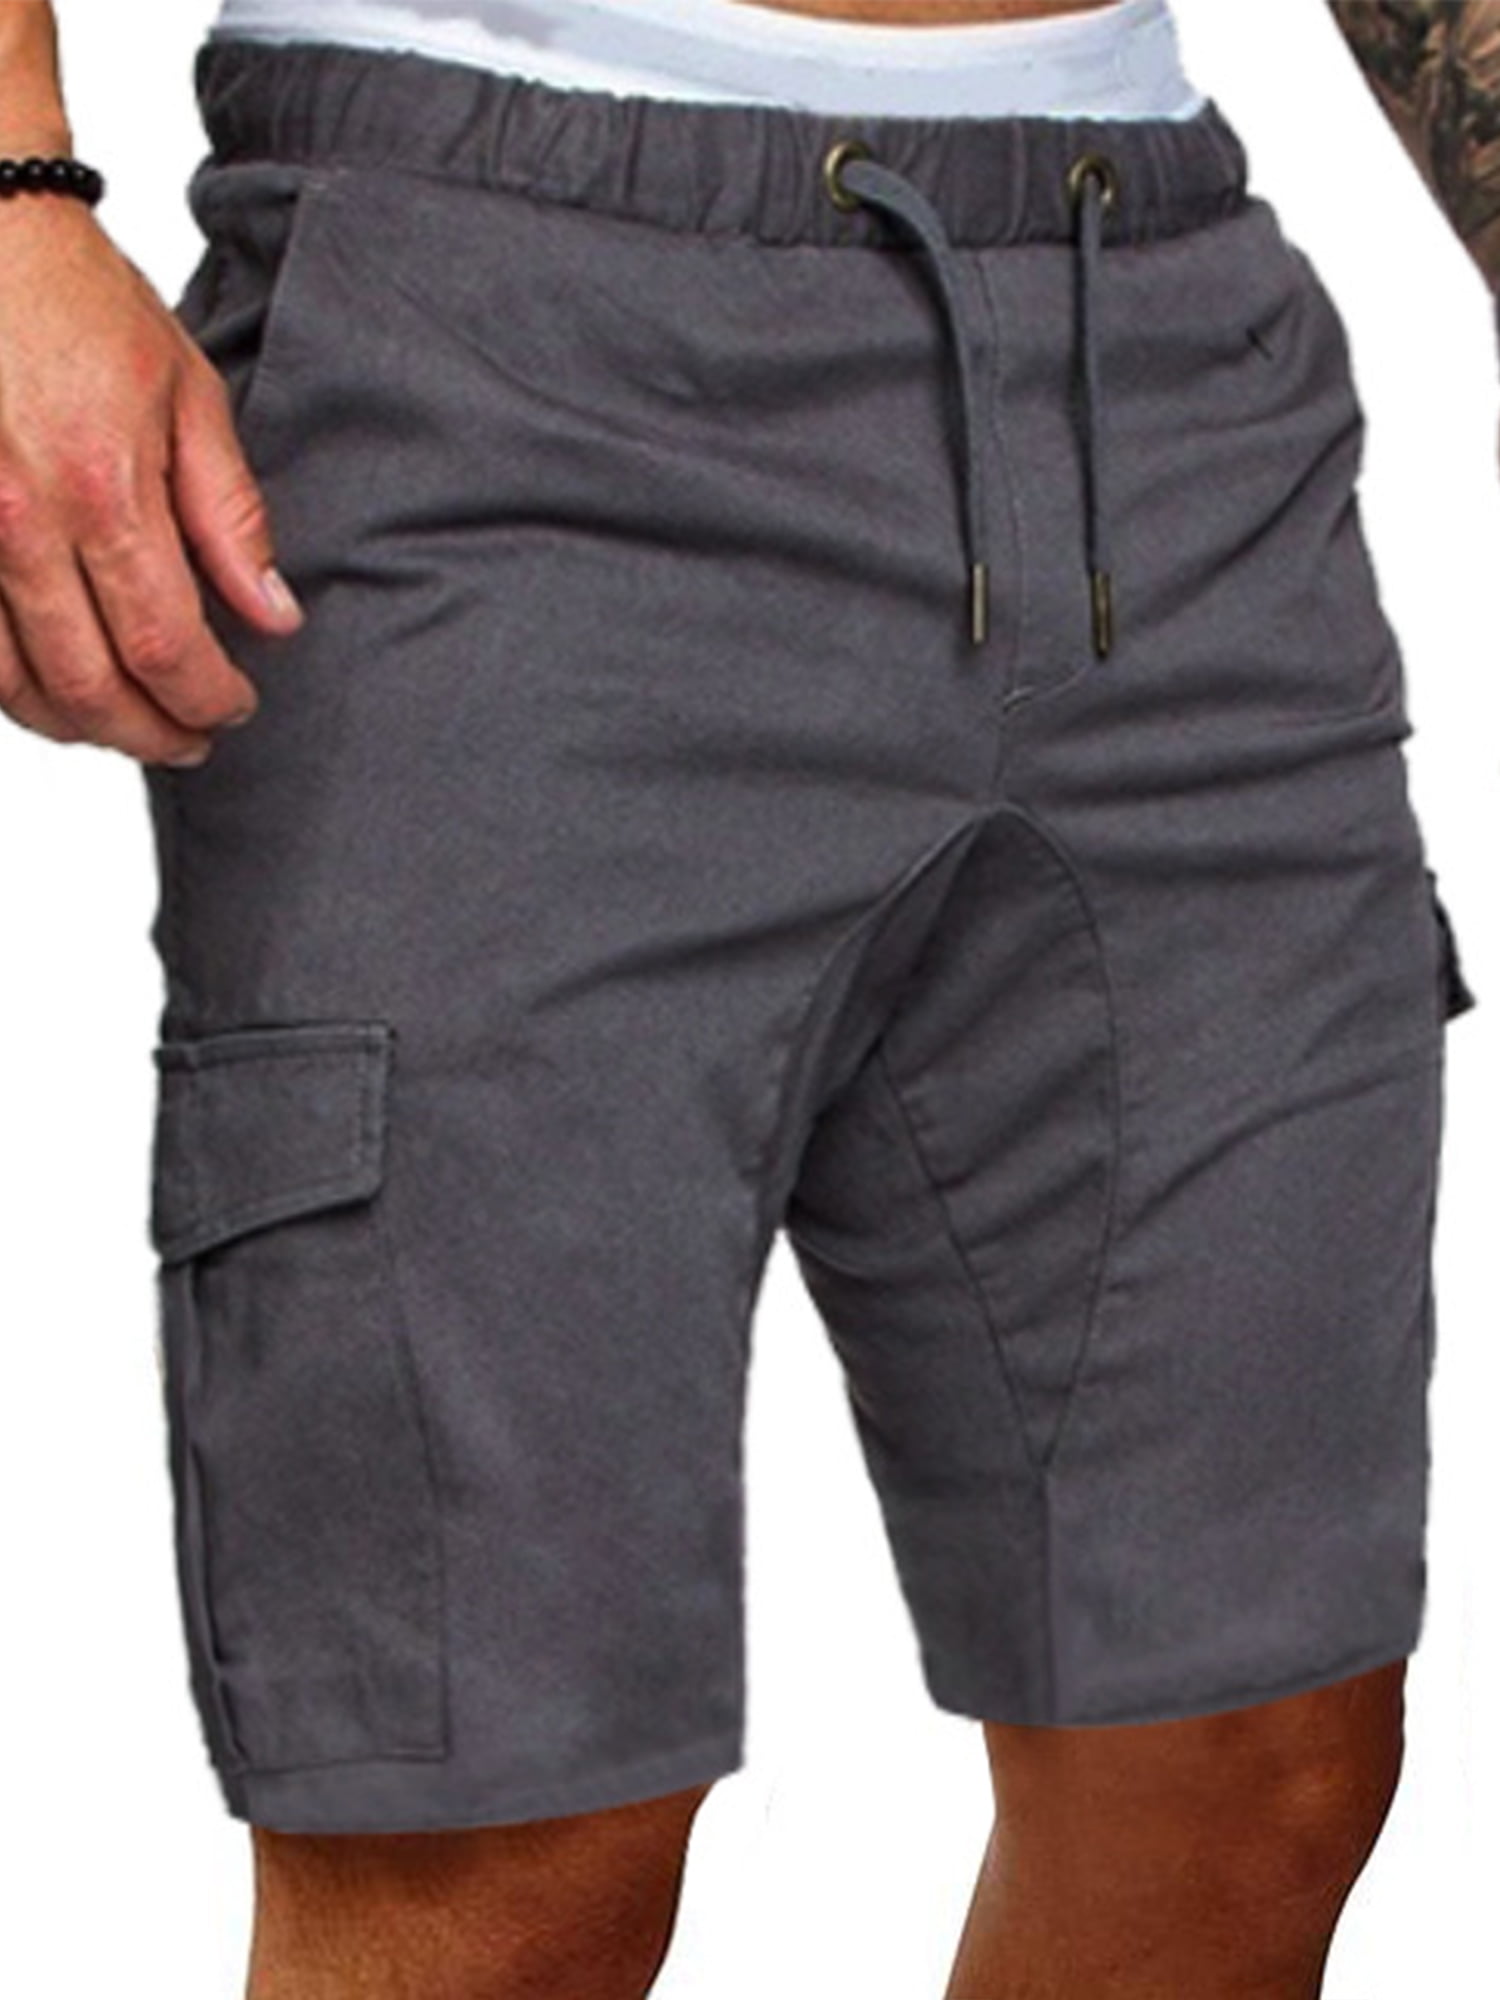 How to get the Best Men's Shorts – Telegraph